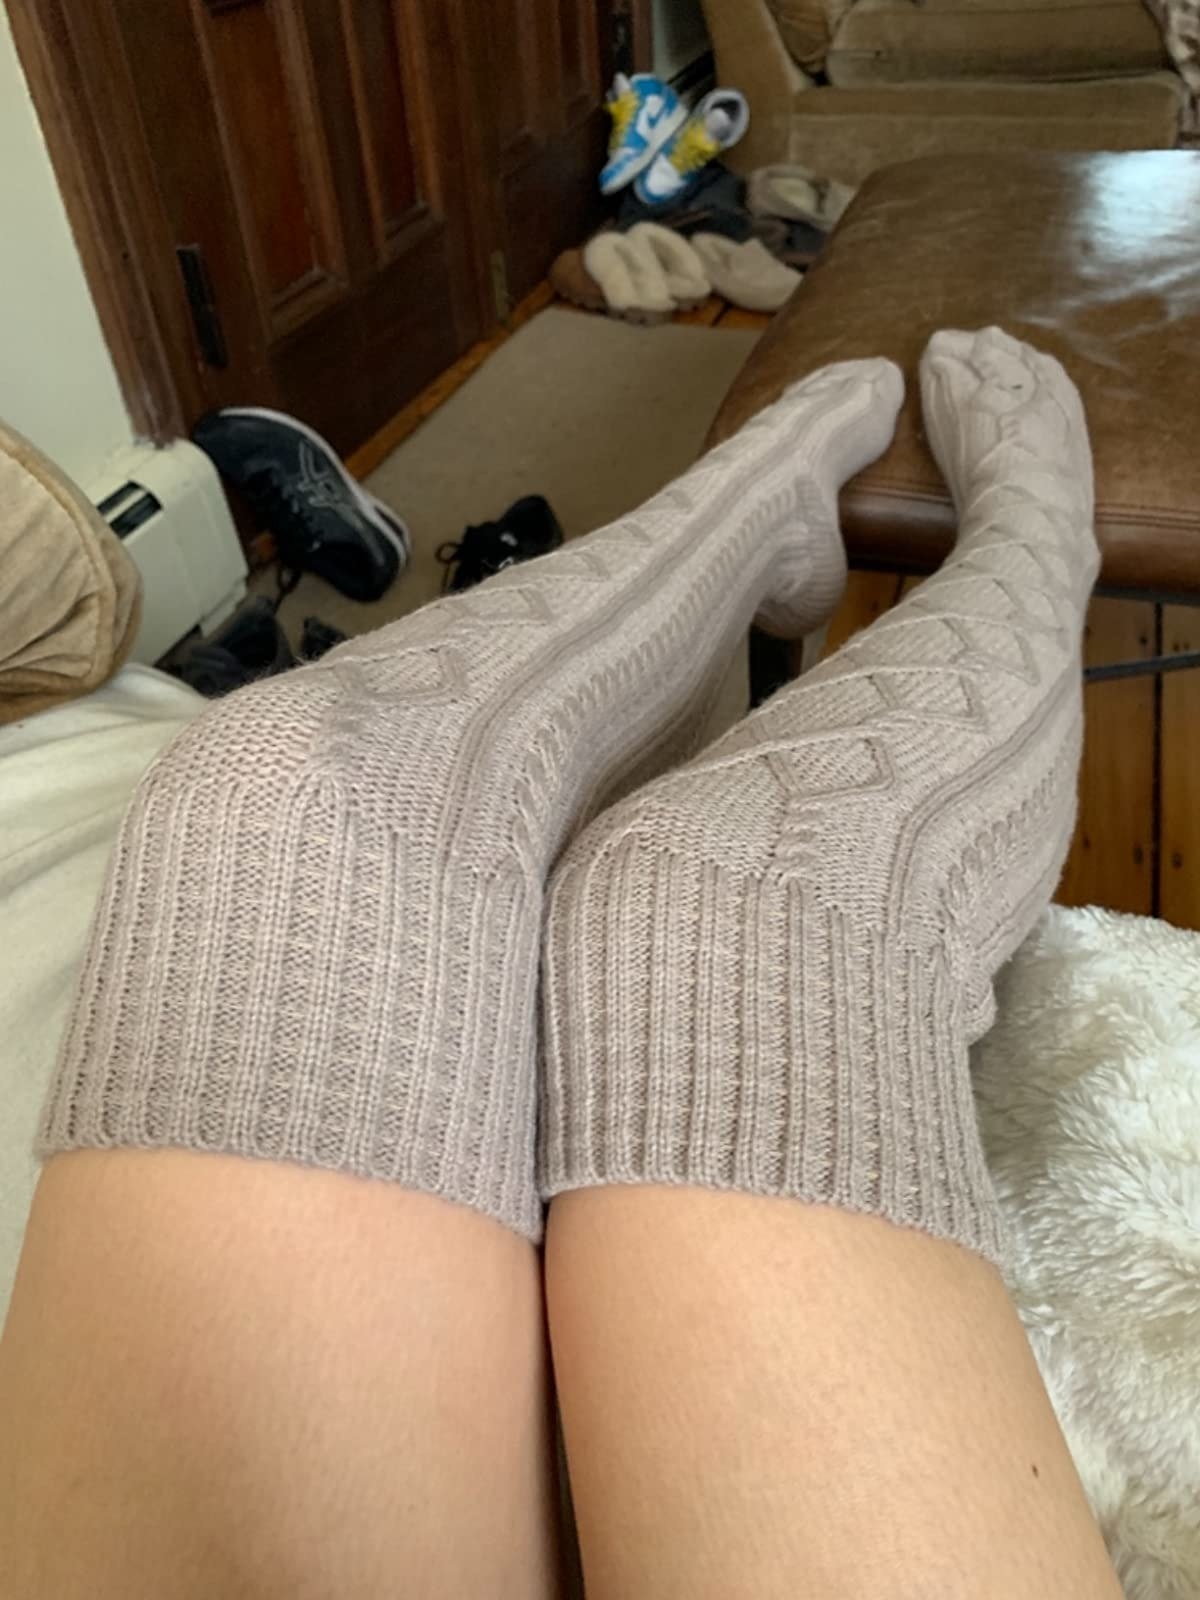 donald bader recommends Thick Thigh High Socks